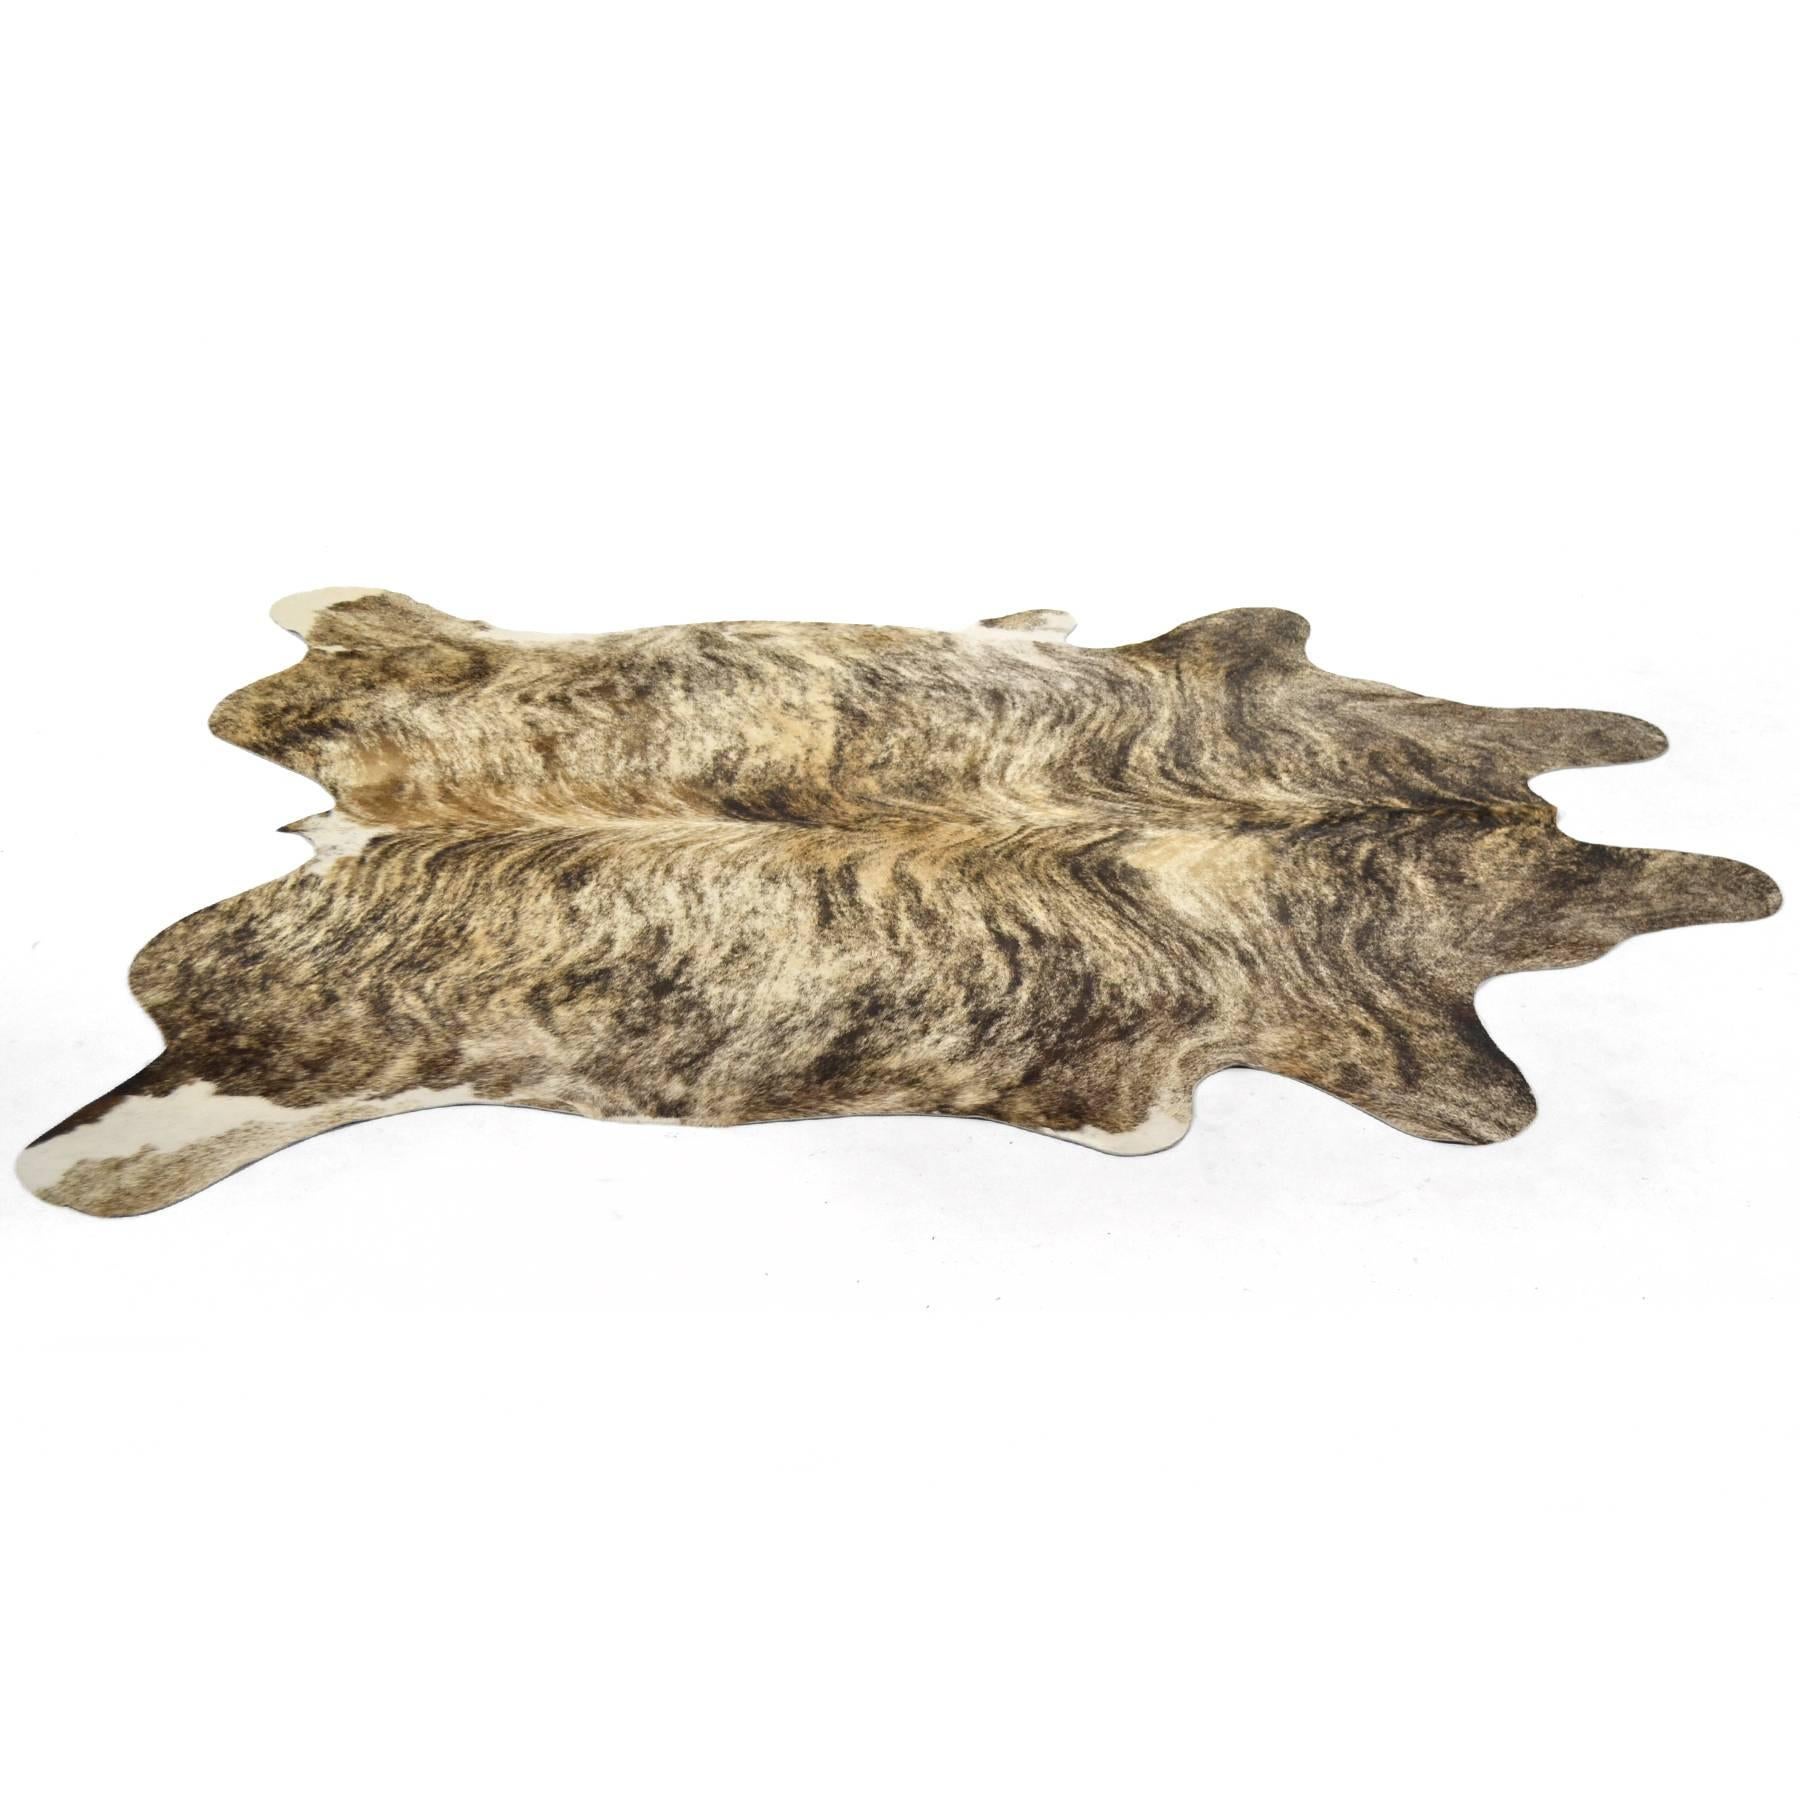 This cow hide rug is not only beautiful with it's brindle color and markings, it is in great condition.